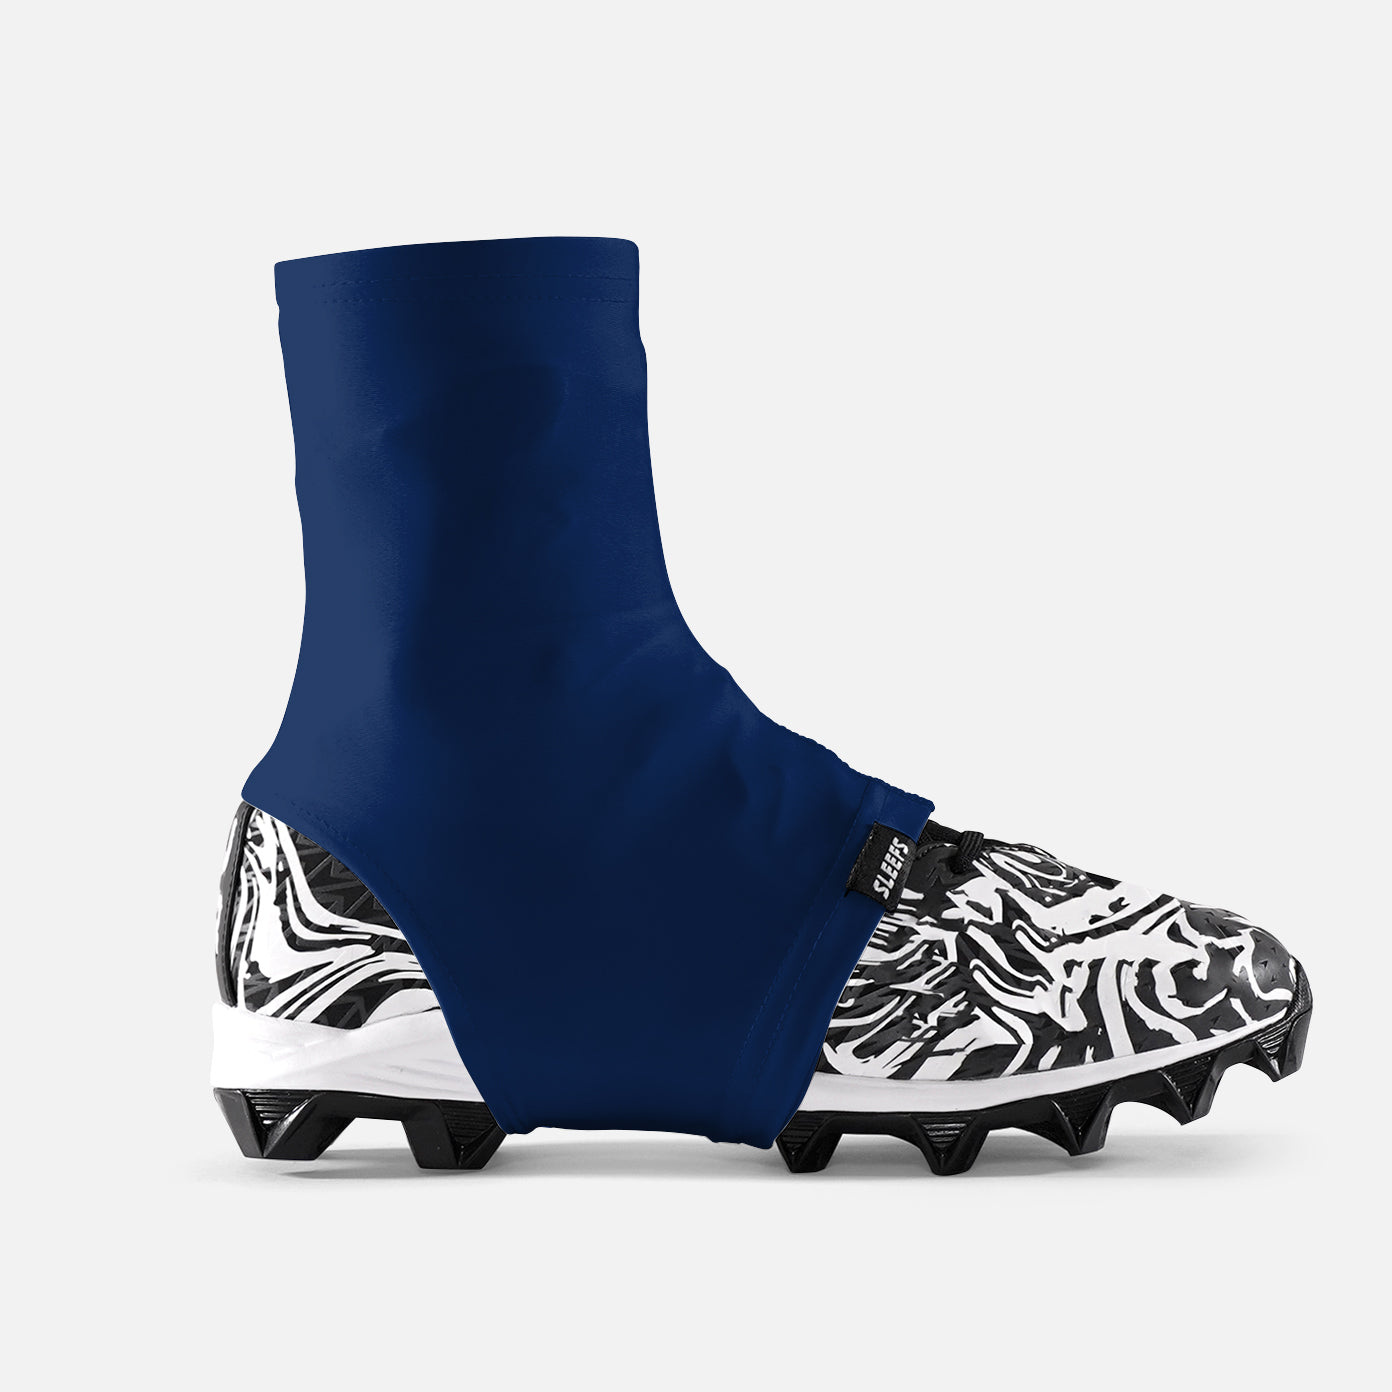 Hue Navy Kids Spats / Cleat Covers